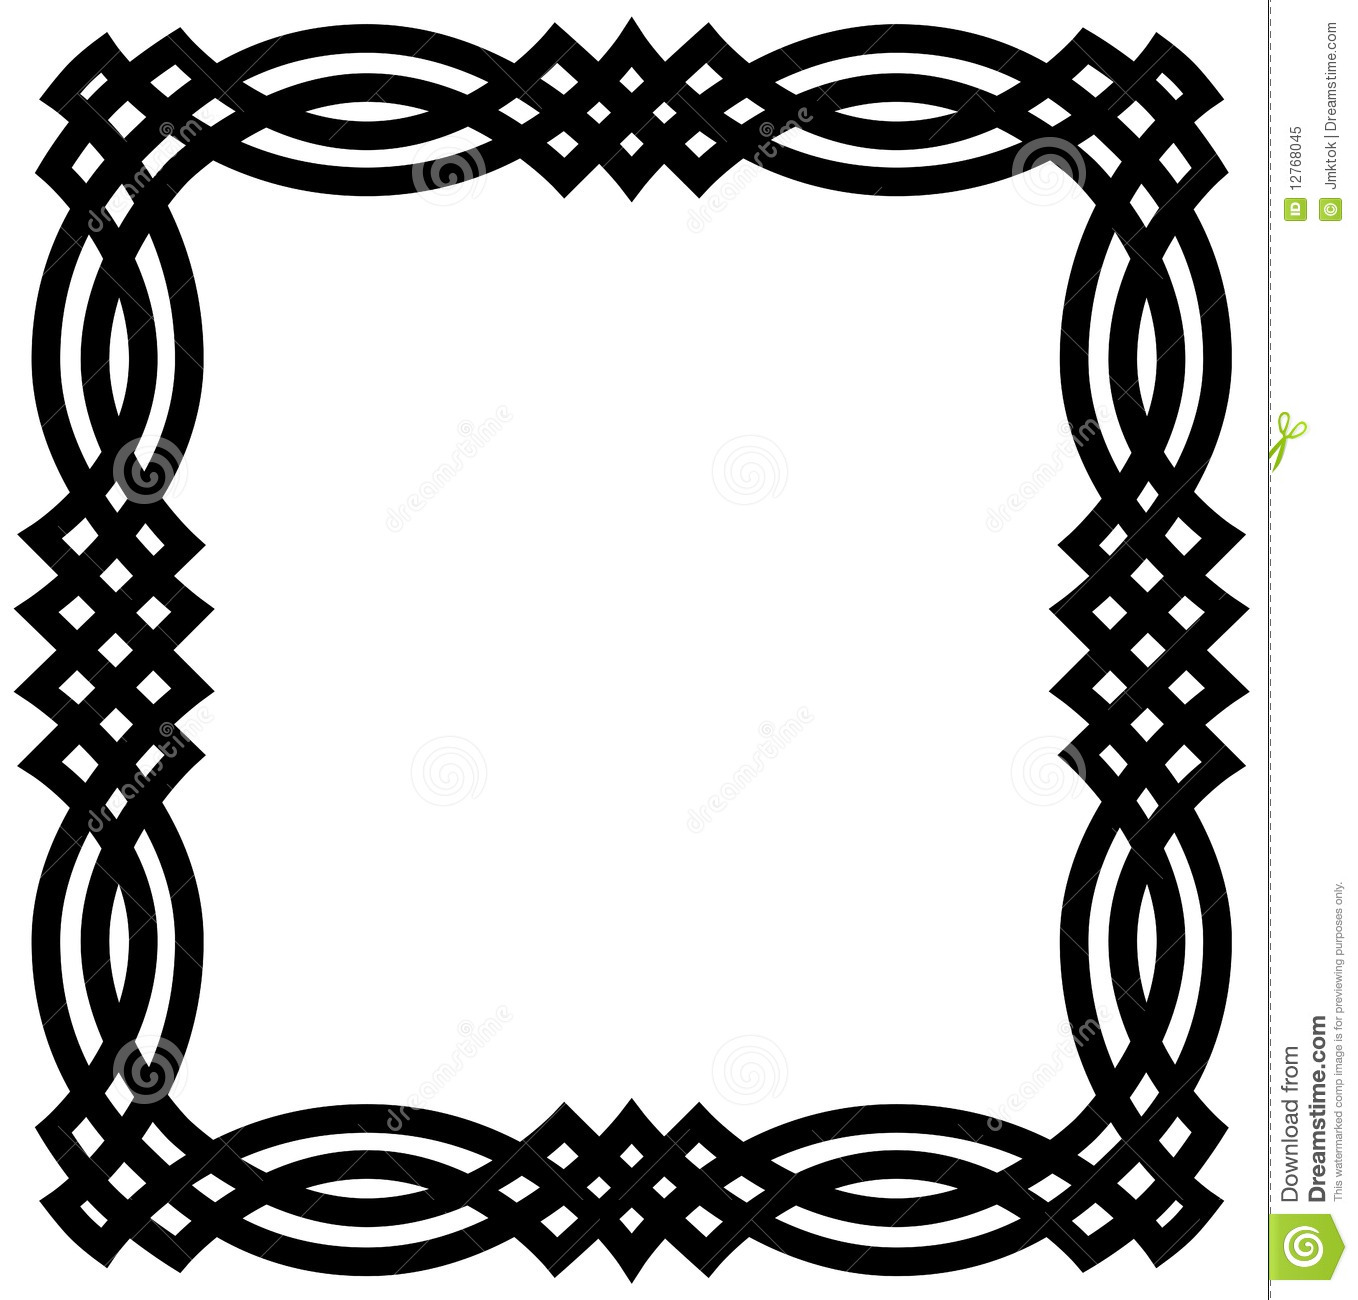 Black And White Square Border With Four Geometric Interwoven Lines For